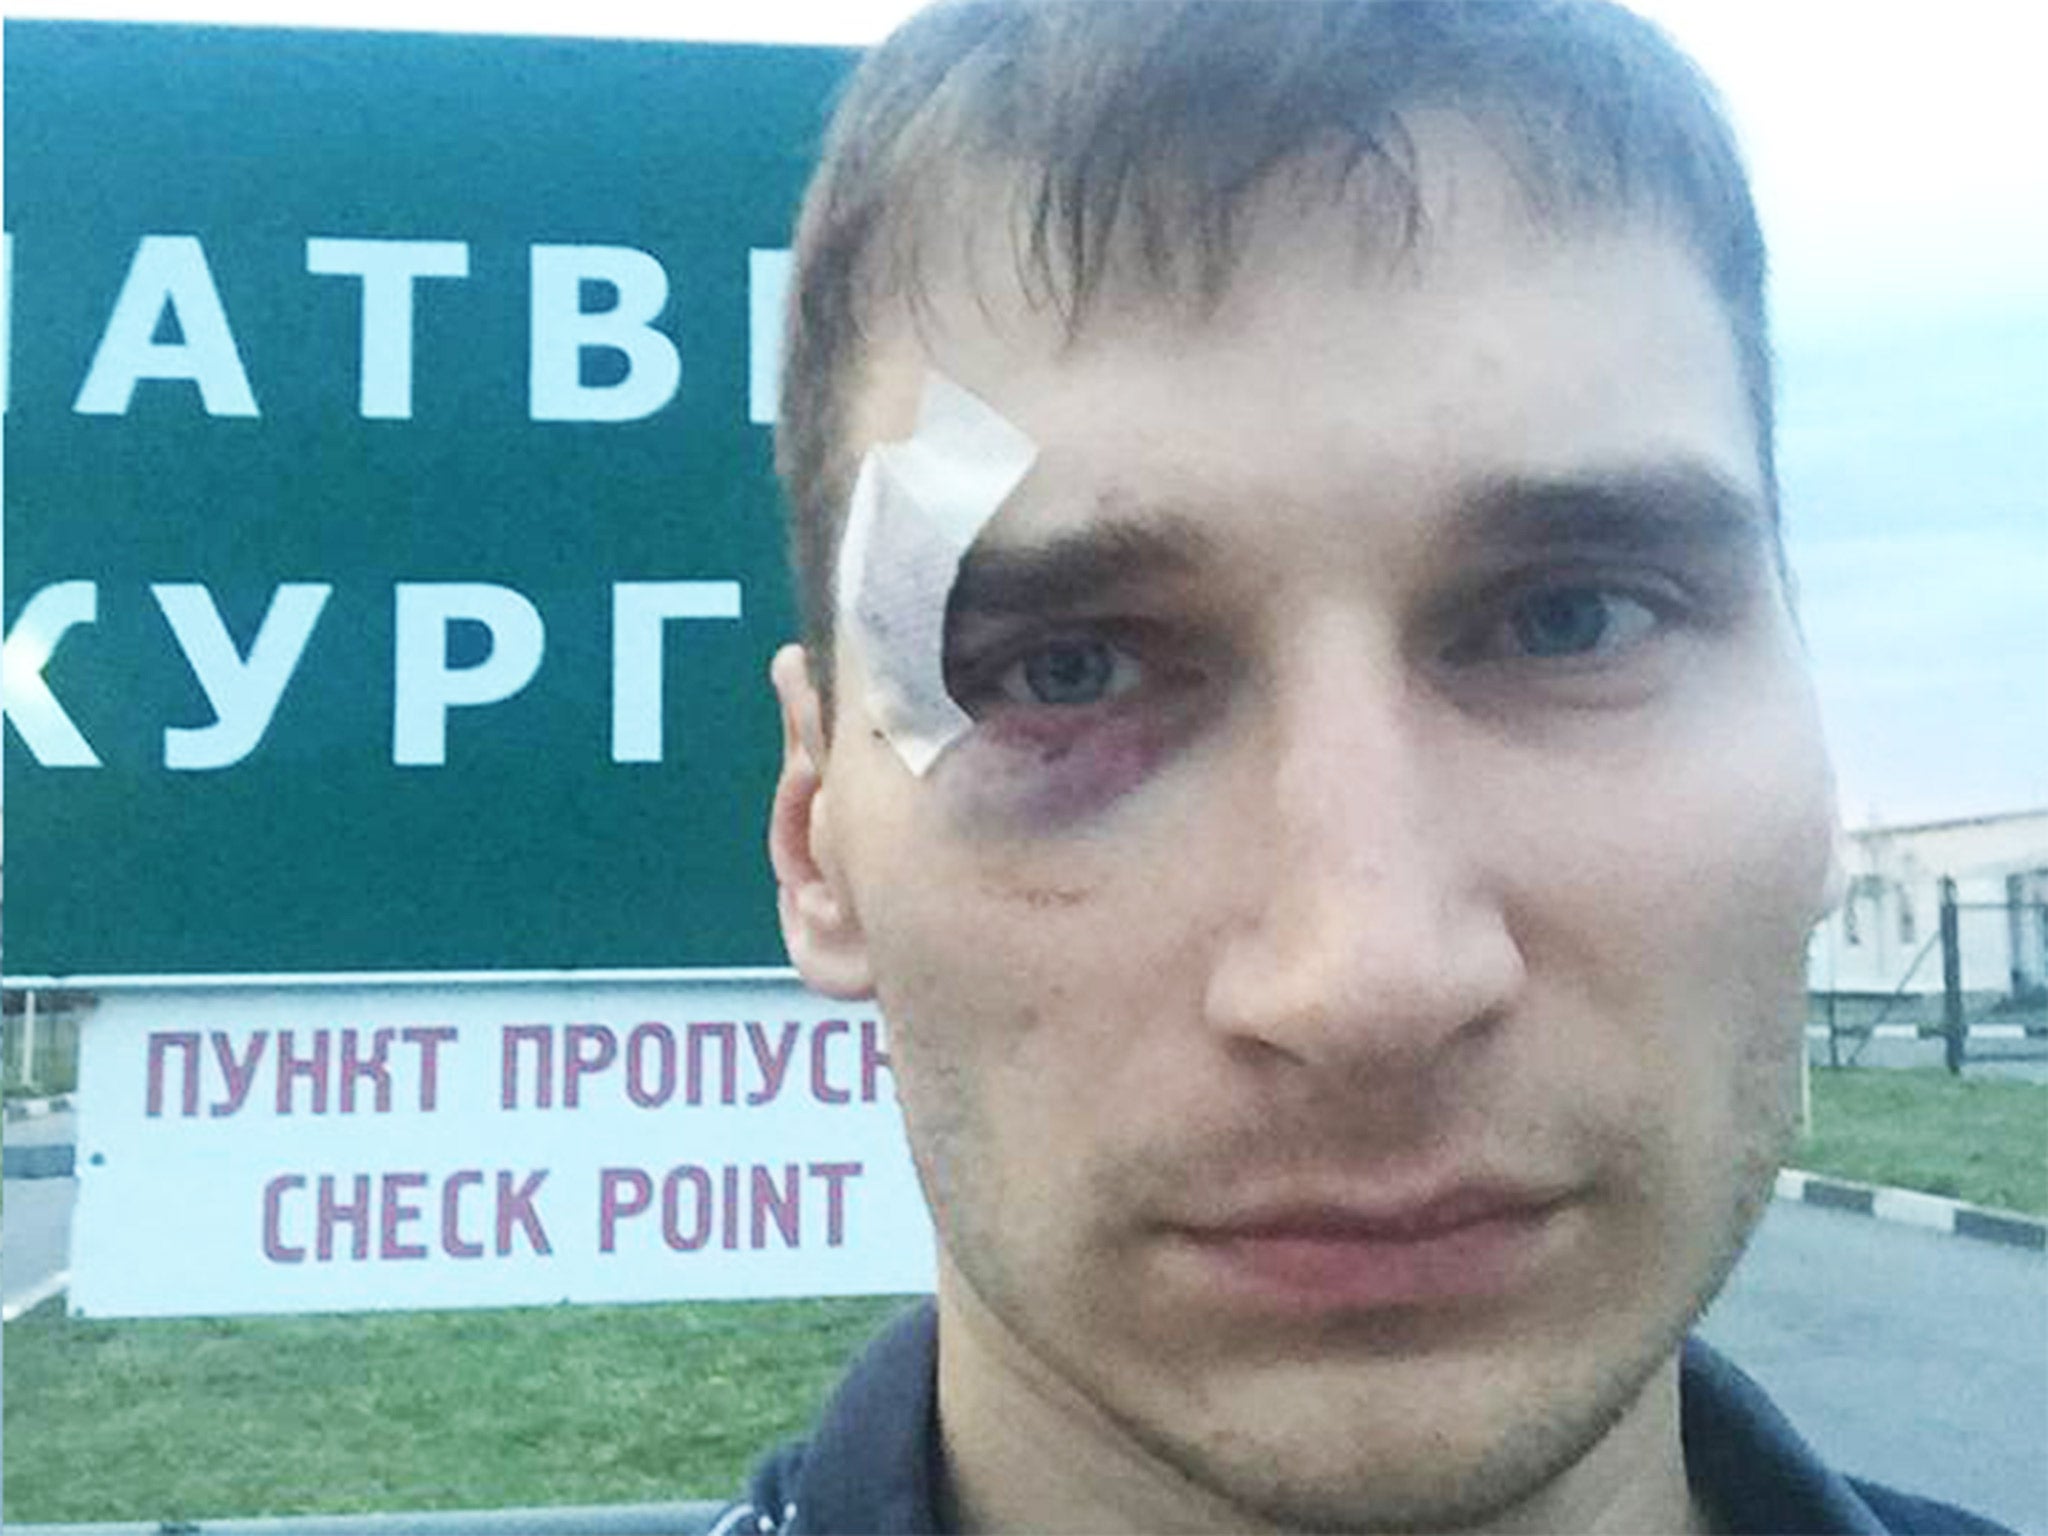 Pavel Kanygin was arrested and and beaten by separatist authorities